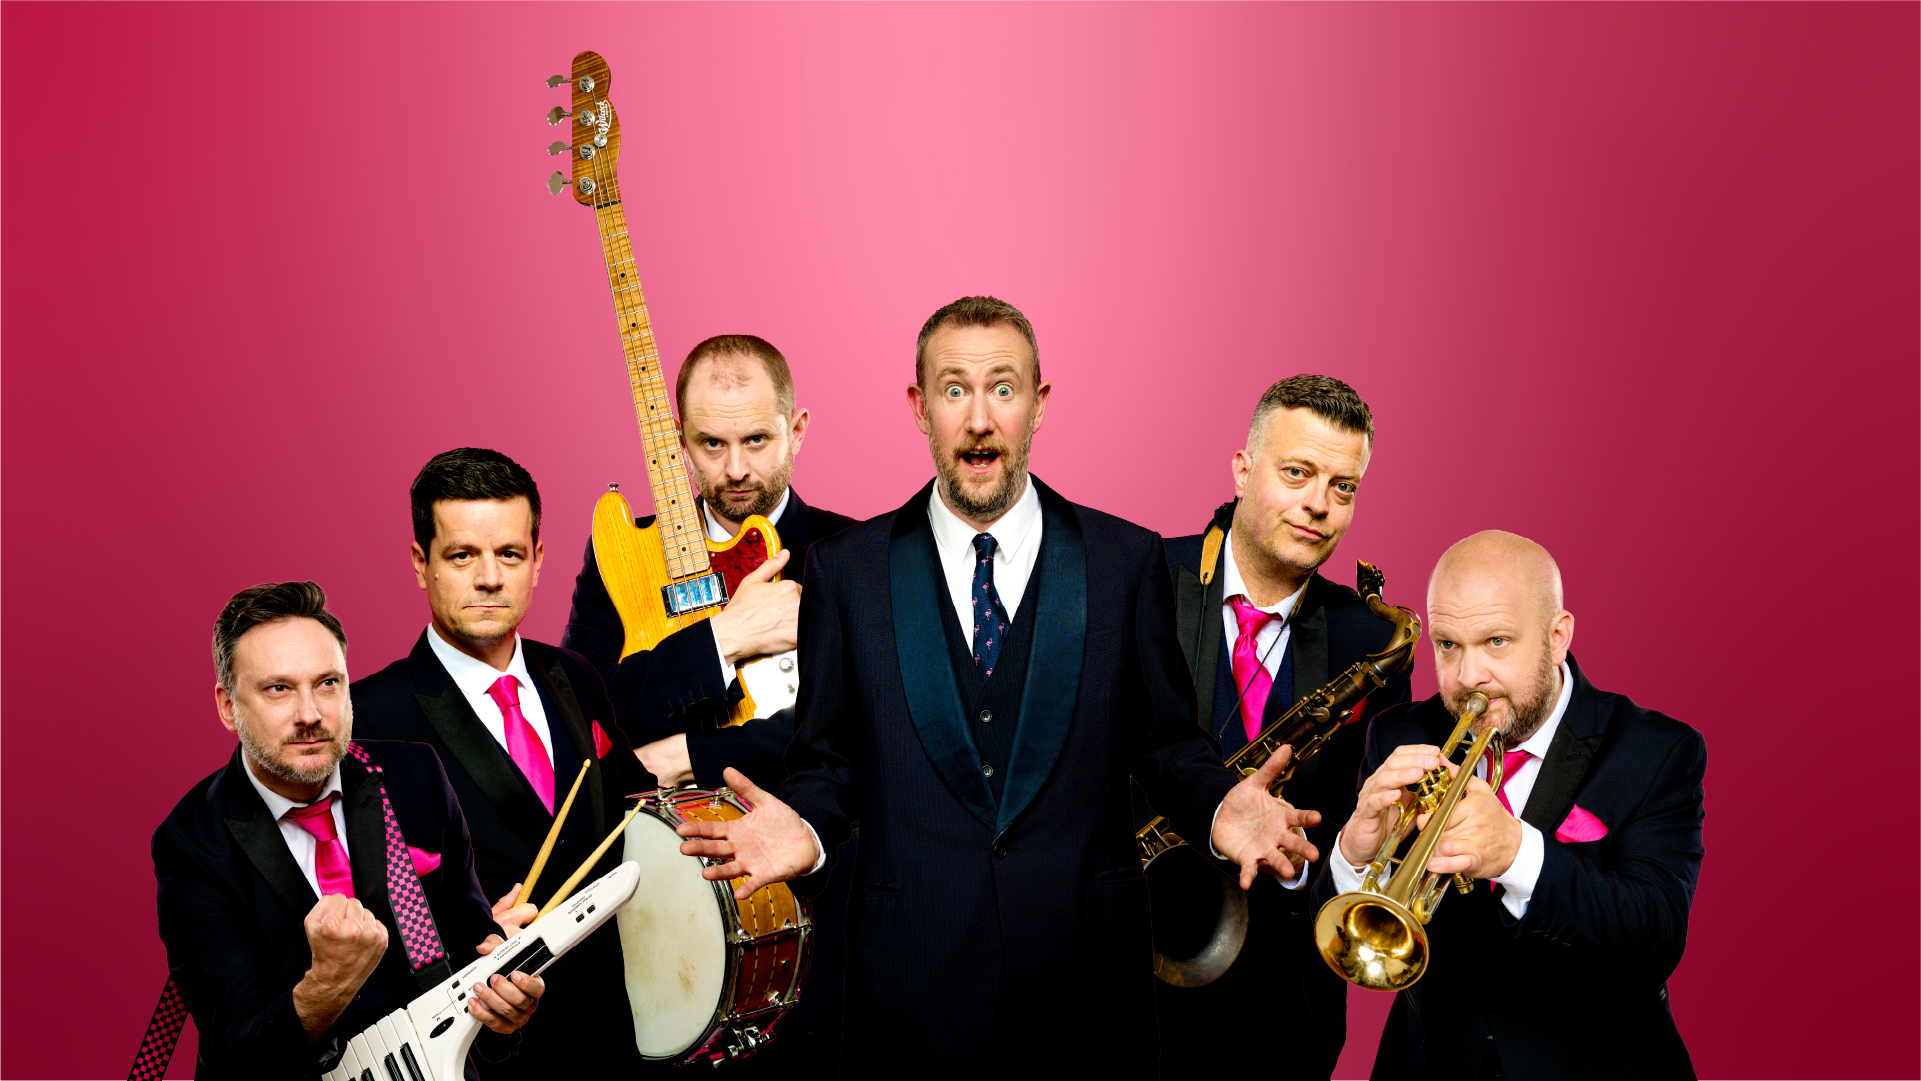  The Horne Section’s Hit Show